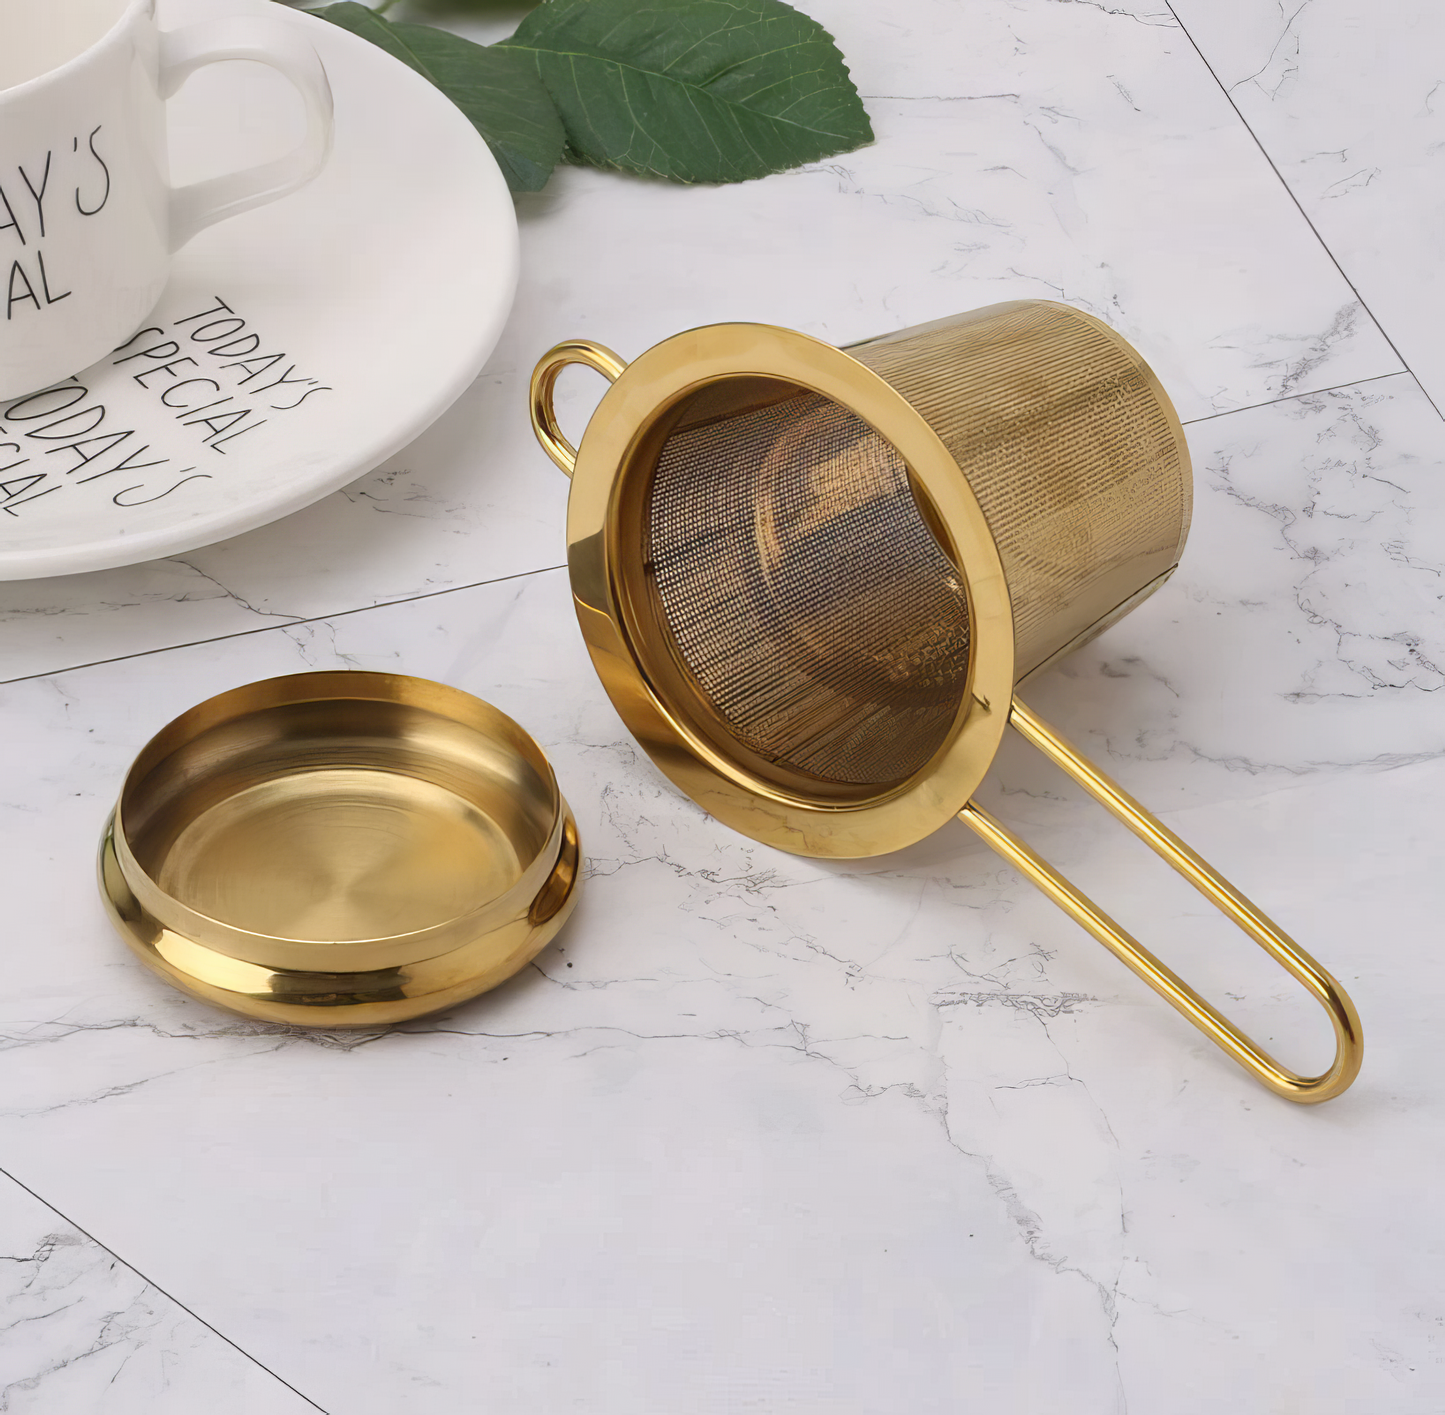 Reusable Stainless Steel Mesh Tea Infuser Filter in Gold